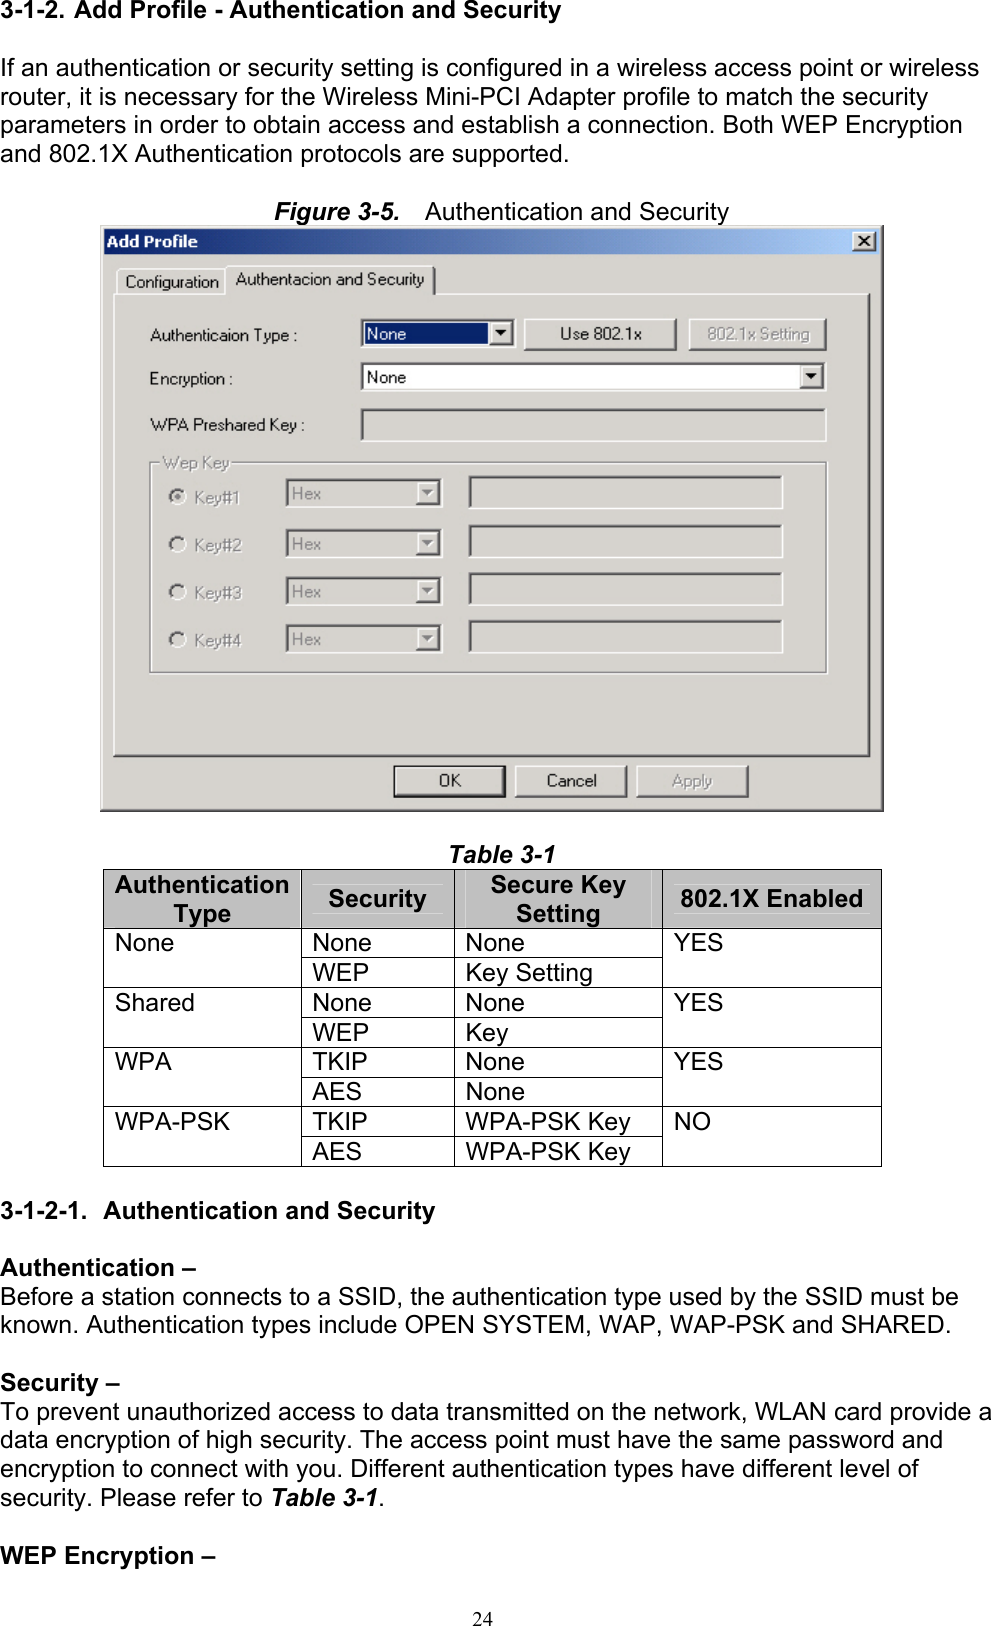 24  3-1-2. Add Profile - Authentication and Security  If an authentication or security setting is configured in a wireless access point or wireless router, it is necessary for the Wireless Mini-PCI Adapter profile to match the security parameters in order to obtain access and establish a connection. Both WEP Encryption and 802.1X Authentication protocols are supported.  Figure 3-5.    Authentication and Security   Table 3-1 Authentication Type  Security  Secure Key Setting  802.1X Enabled None None None WEP Key Setting YES None None Shared WEP Key  YES TKIP None WPA AES None YES TKIP WPA-PSK Key WPA-PSK AES WPA-PSK Key NO  3-1-2-1.  Authentication and Security  Authentication –   Before a station connects to a SSID, the authentication type used by the SSID must be known. Authentication types include OPEN SYSTEM, WAP, WAP-PSK and SHARED.  Security –   To prevent unauthorized access to data transmitted on the network, WLAN card provide a data encryption of high security. The access point must have the same password and encryption to connect with you. Different authentication types have different level of security. Please refer to Table 3-1.  WEP Encryption –   